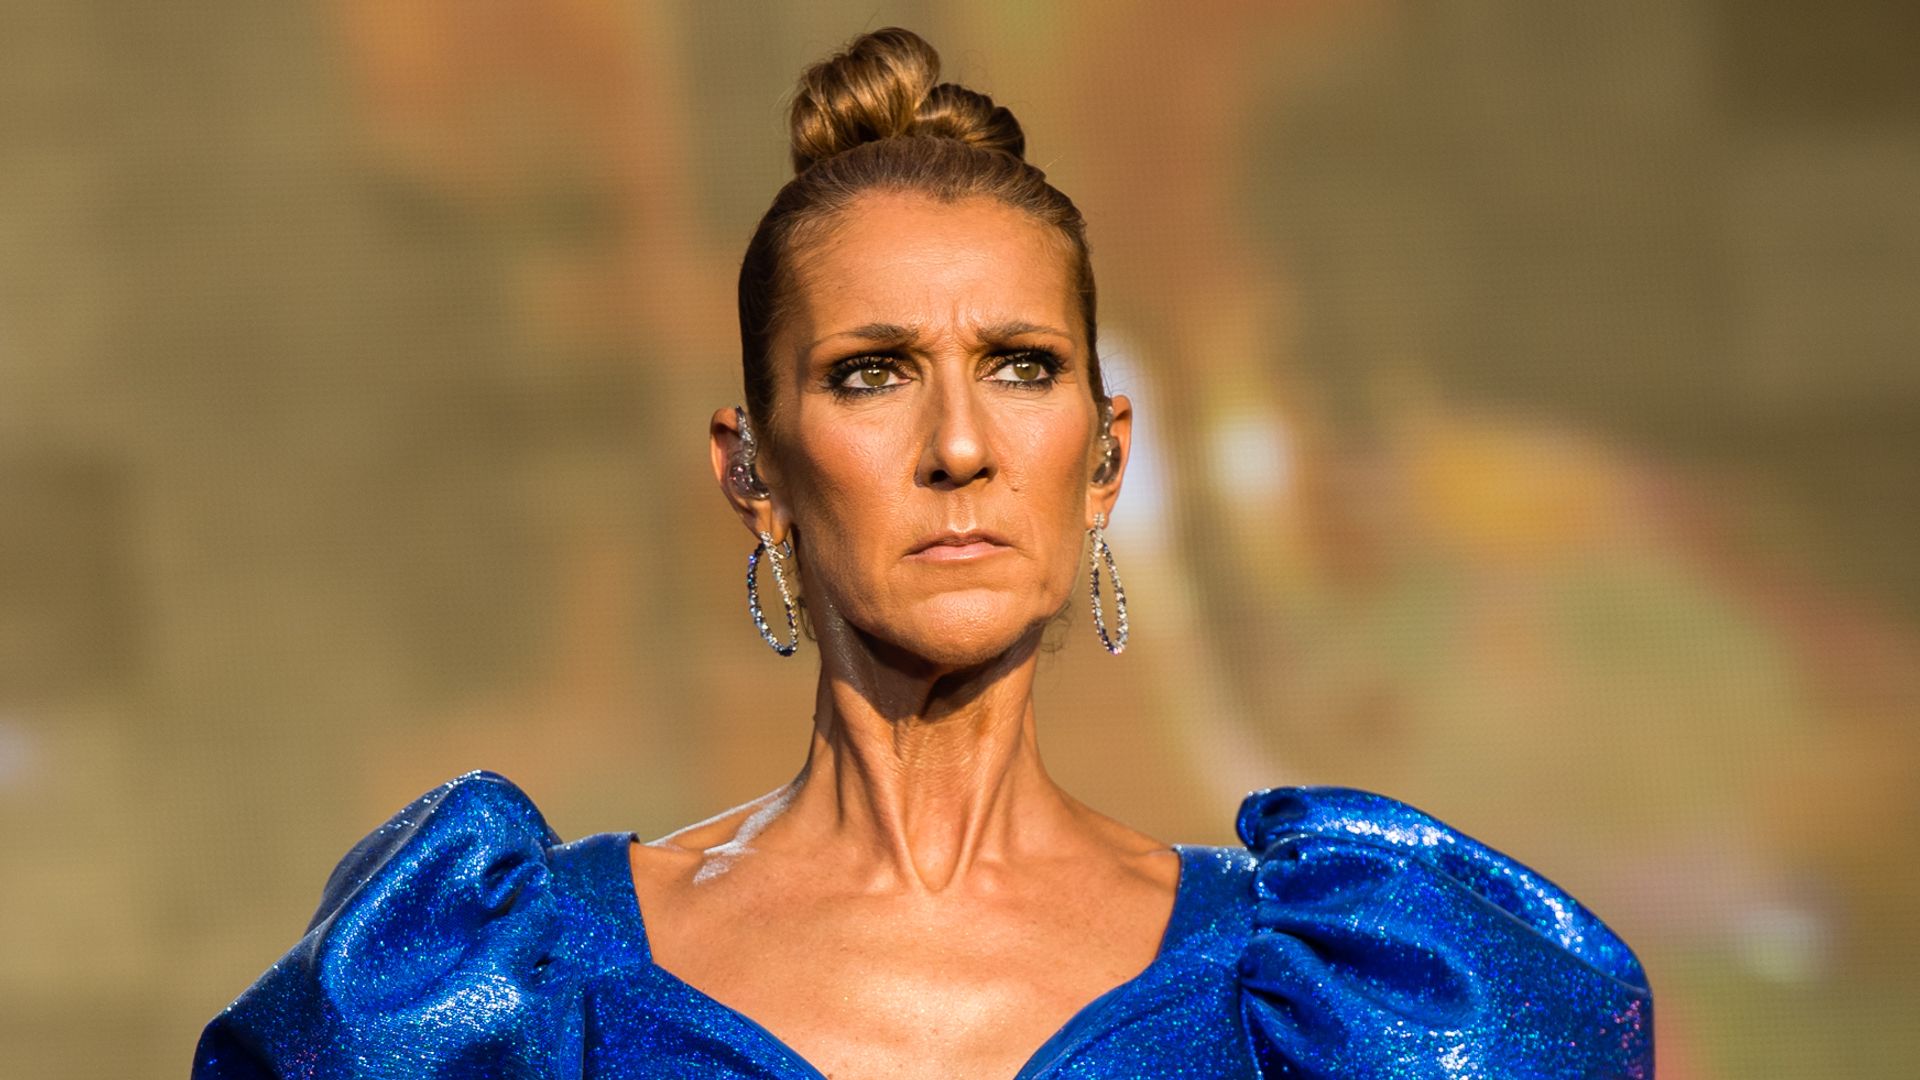 Celine Dion in blue sparkly dress performing live at Barclaycard Presents British Summer Time Hyde Park